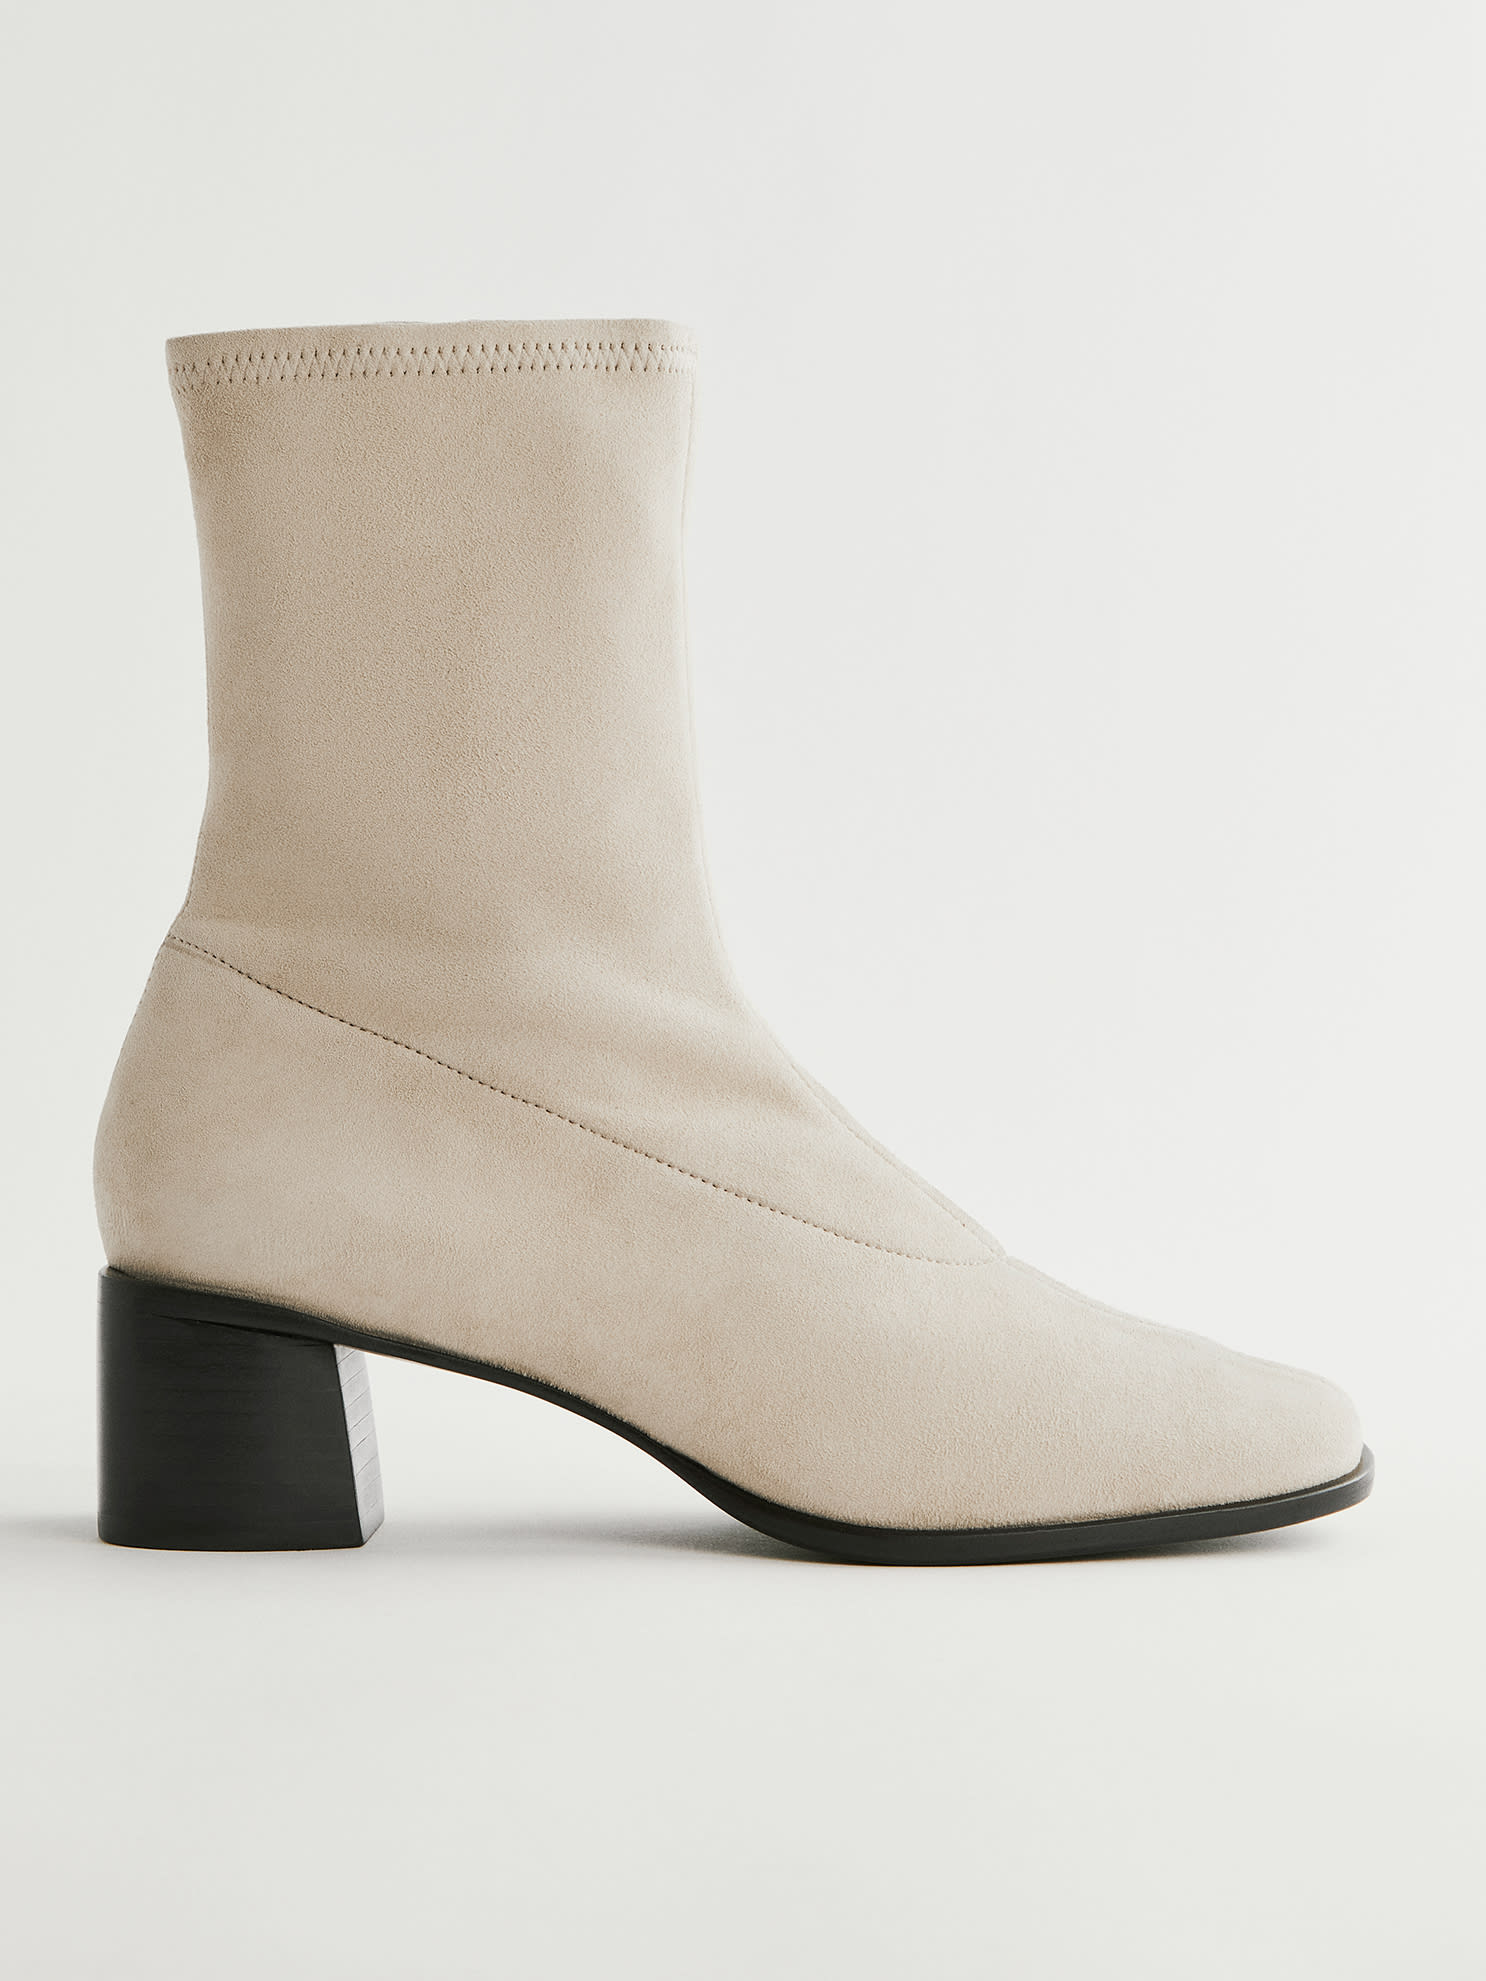 Reformation Louie Stretch Sock Bootie In Fawn Stretch Suede